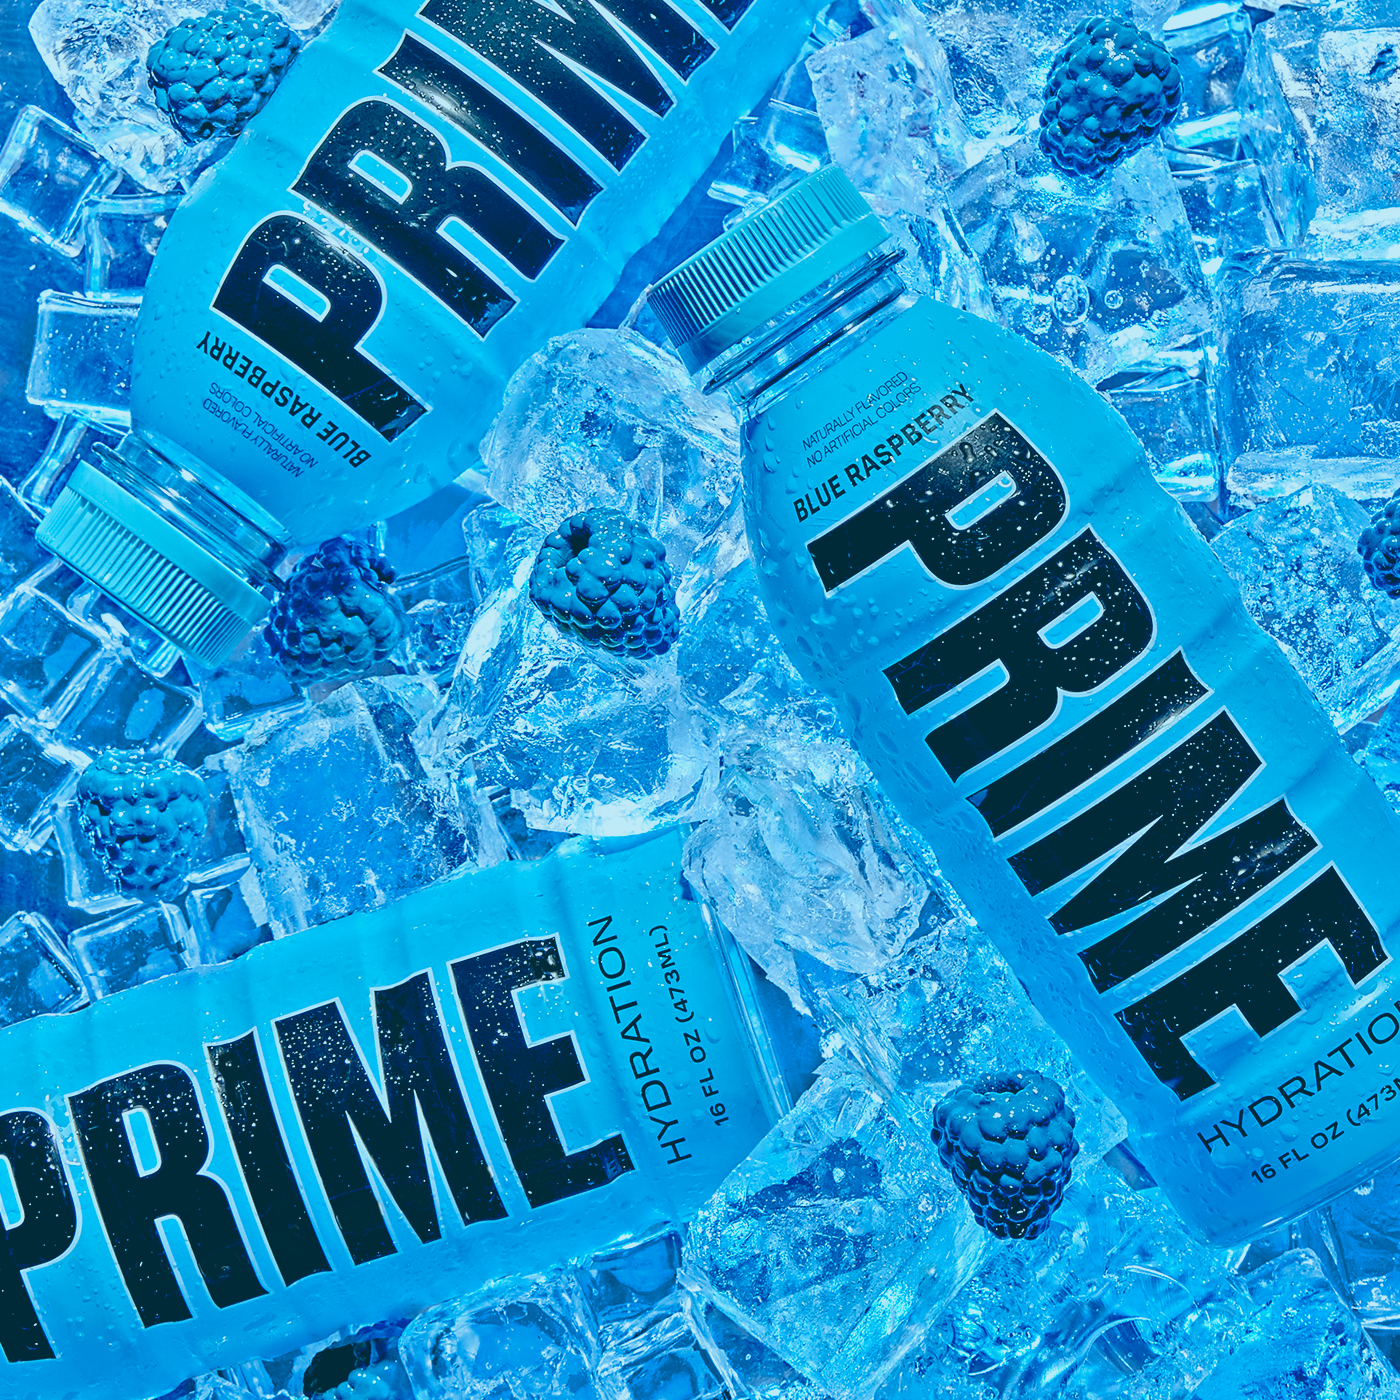 Several bottles of 'PRIME' hydration drink in blue raspberry flavor, submerged in ice, with blackberries scattered throughout, all cast in a monochromatic blue tone.